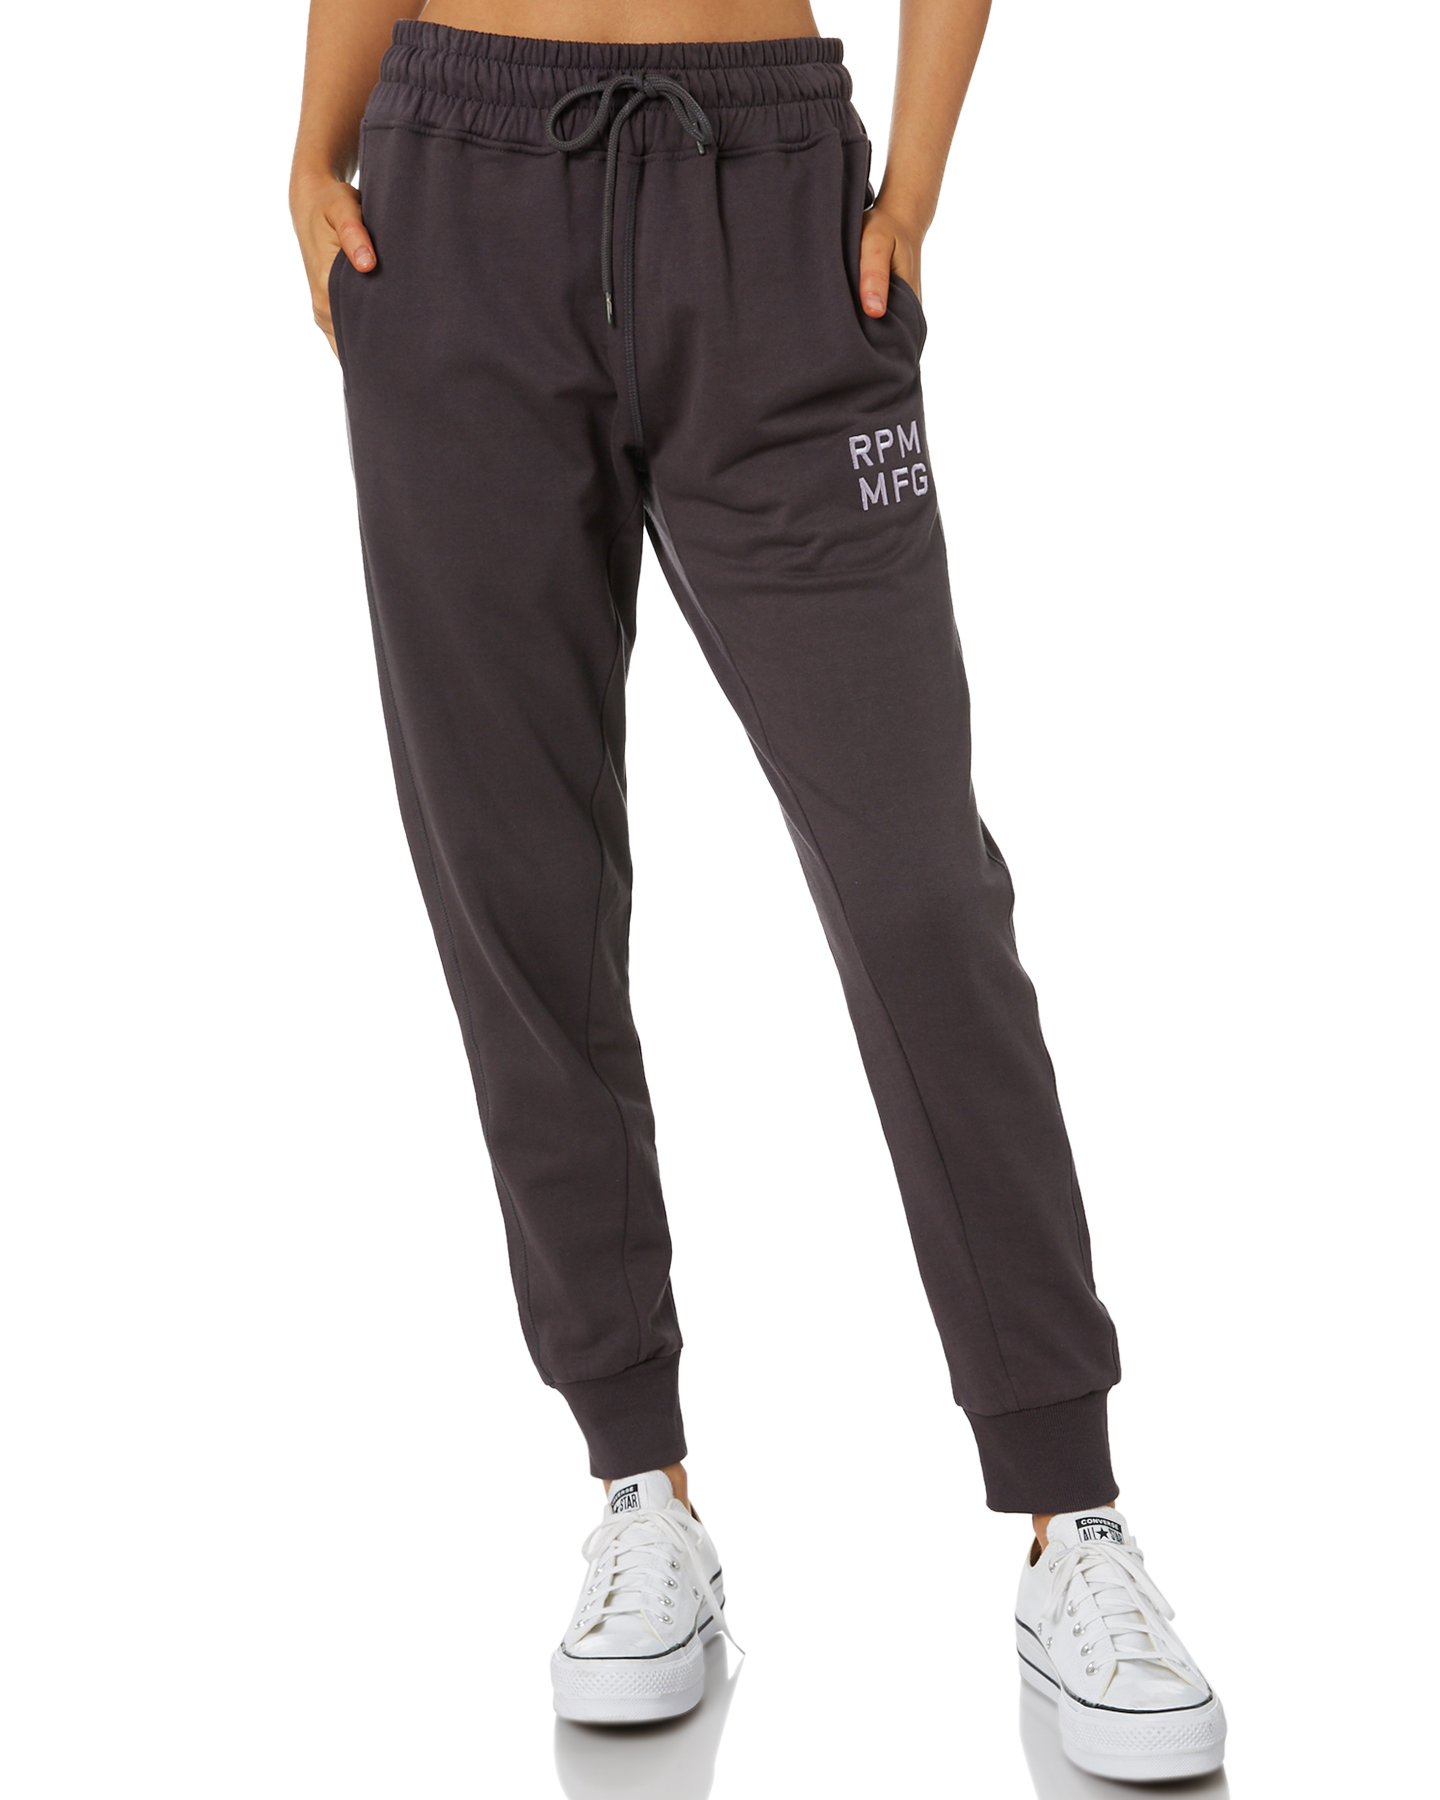 Rpm Slouch Trackie - Charcoal | SurfStitch